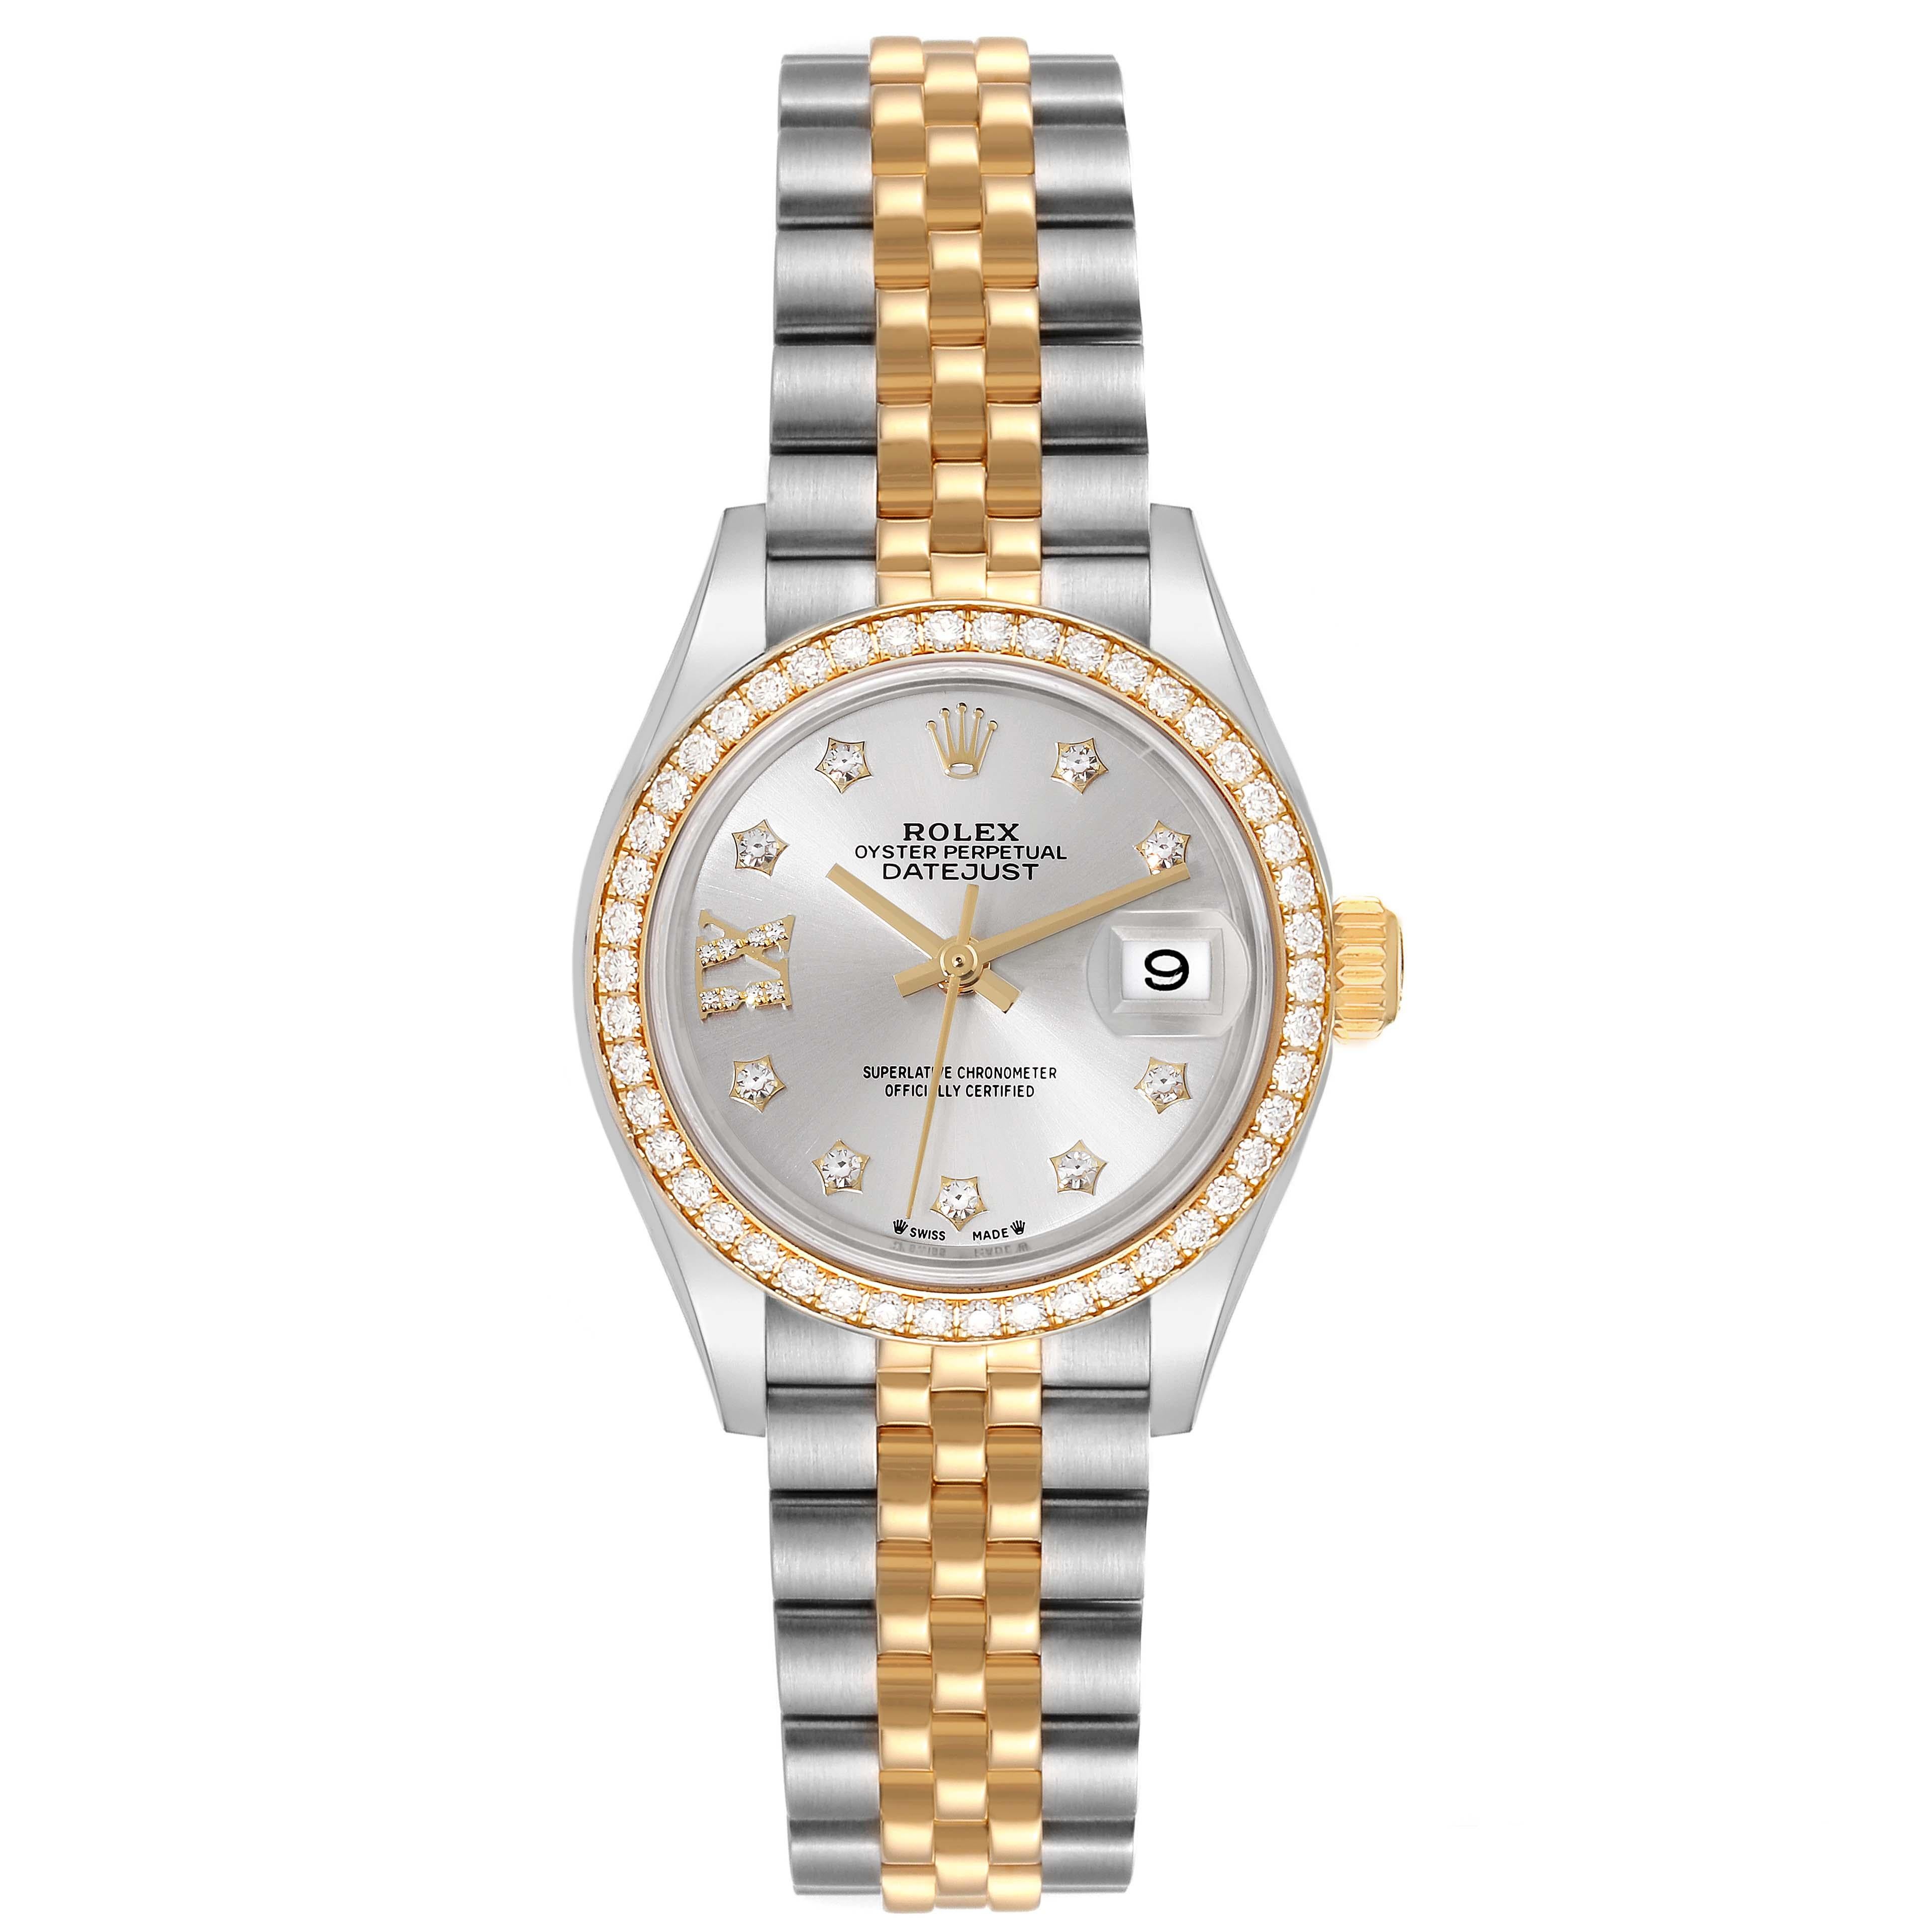 Rolex Datejust 28 Steel Yellow Gold Diamond Ladies Watch 279383 Box Card. Officially certified chronometer self-winding movement. Stainless steel oyster case 28.0 mm in diameter. Rolex logo on an 18K yellow gold crown. 18k yellow gold original Rolex